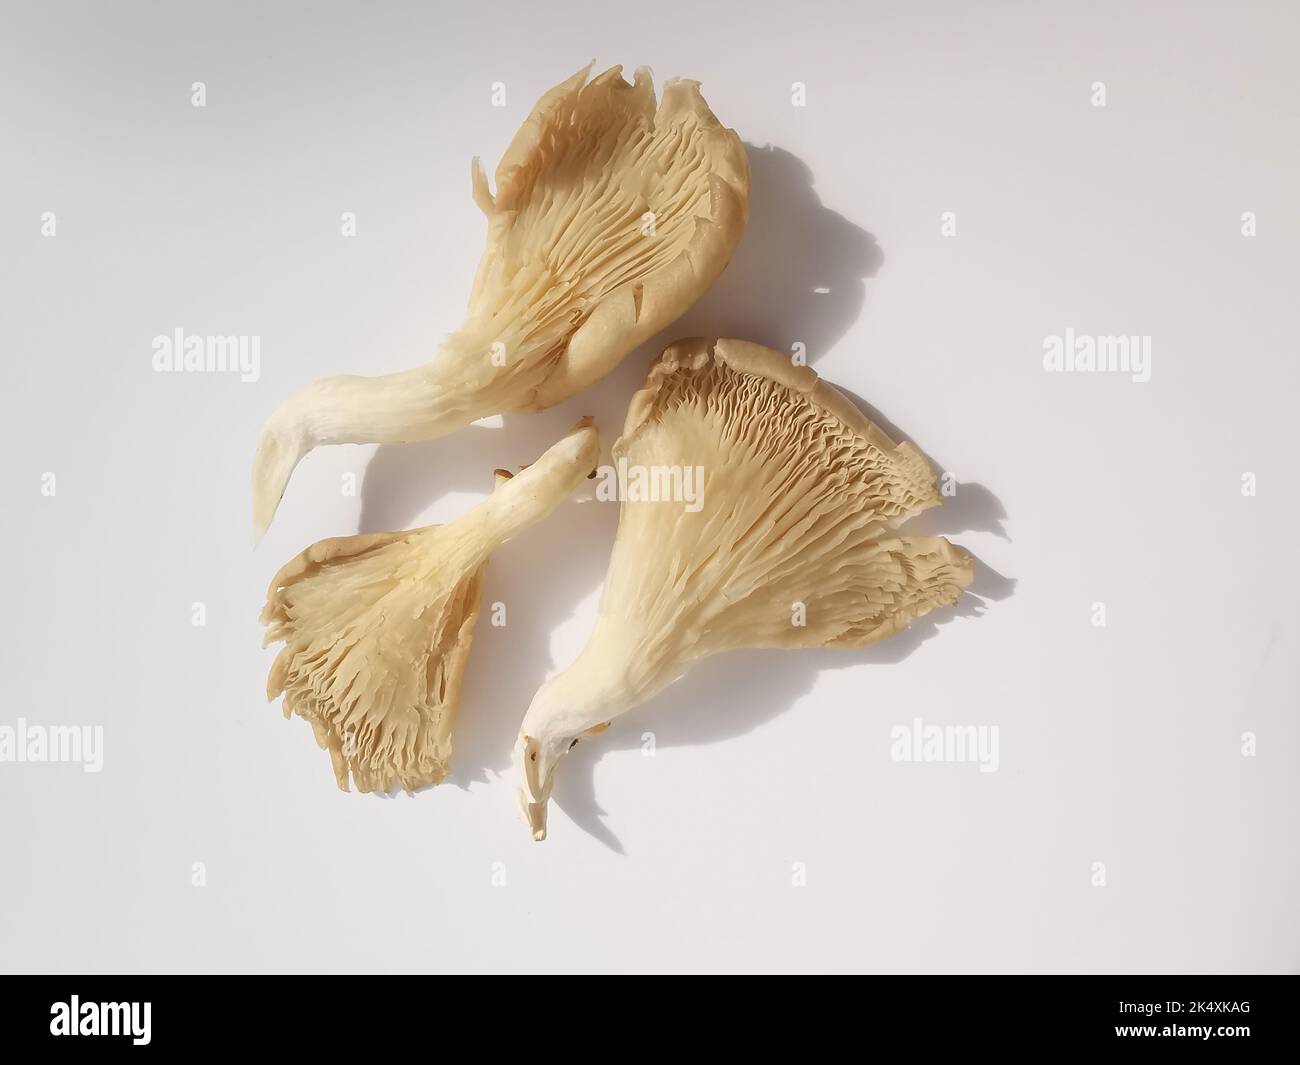 Group of three oyster mushrooms against plain white background with copy space Stock Photo